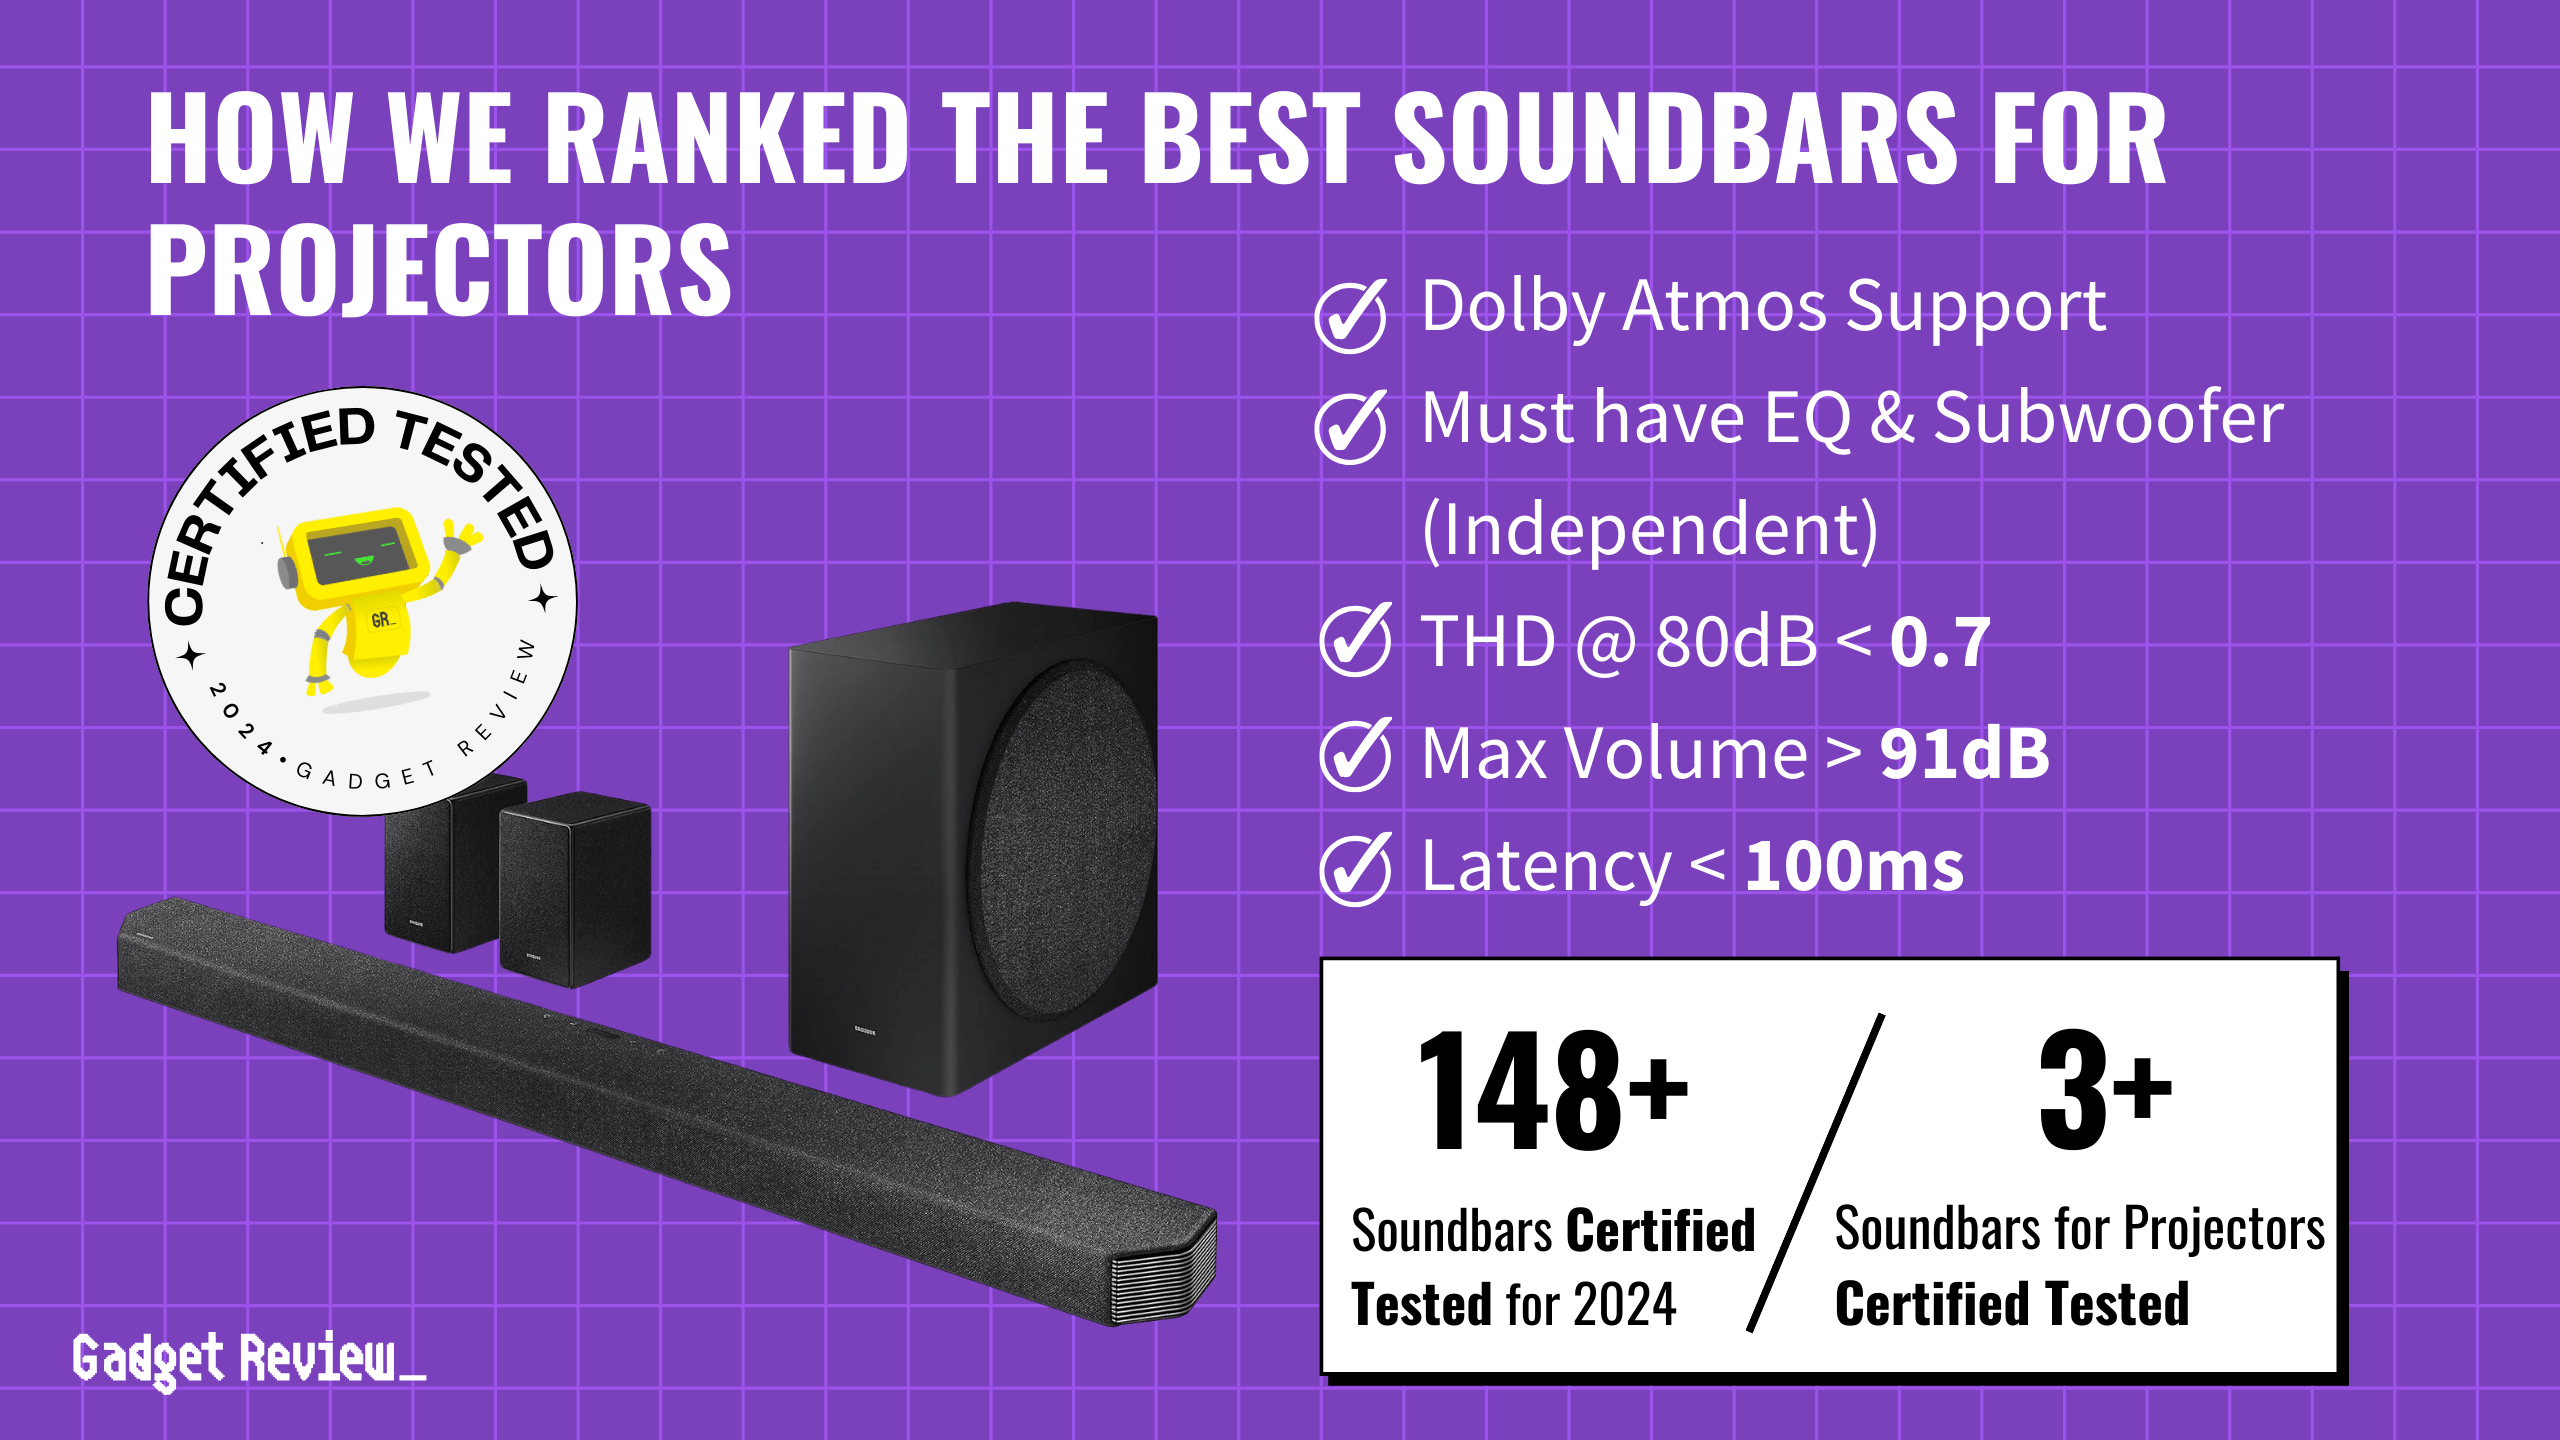 What’s the Best Soundbar For Projectors? 3 Options Ranked